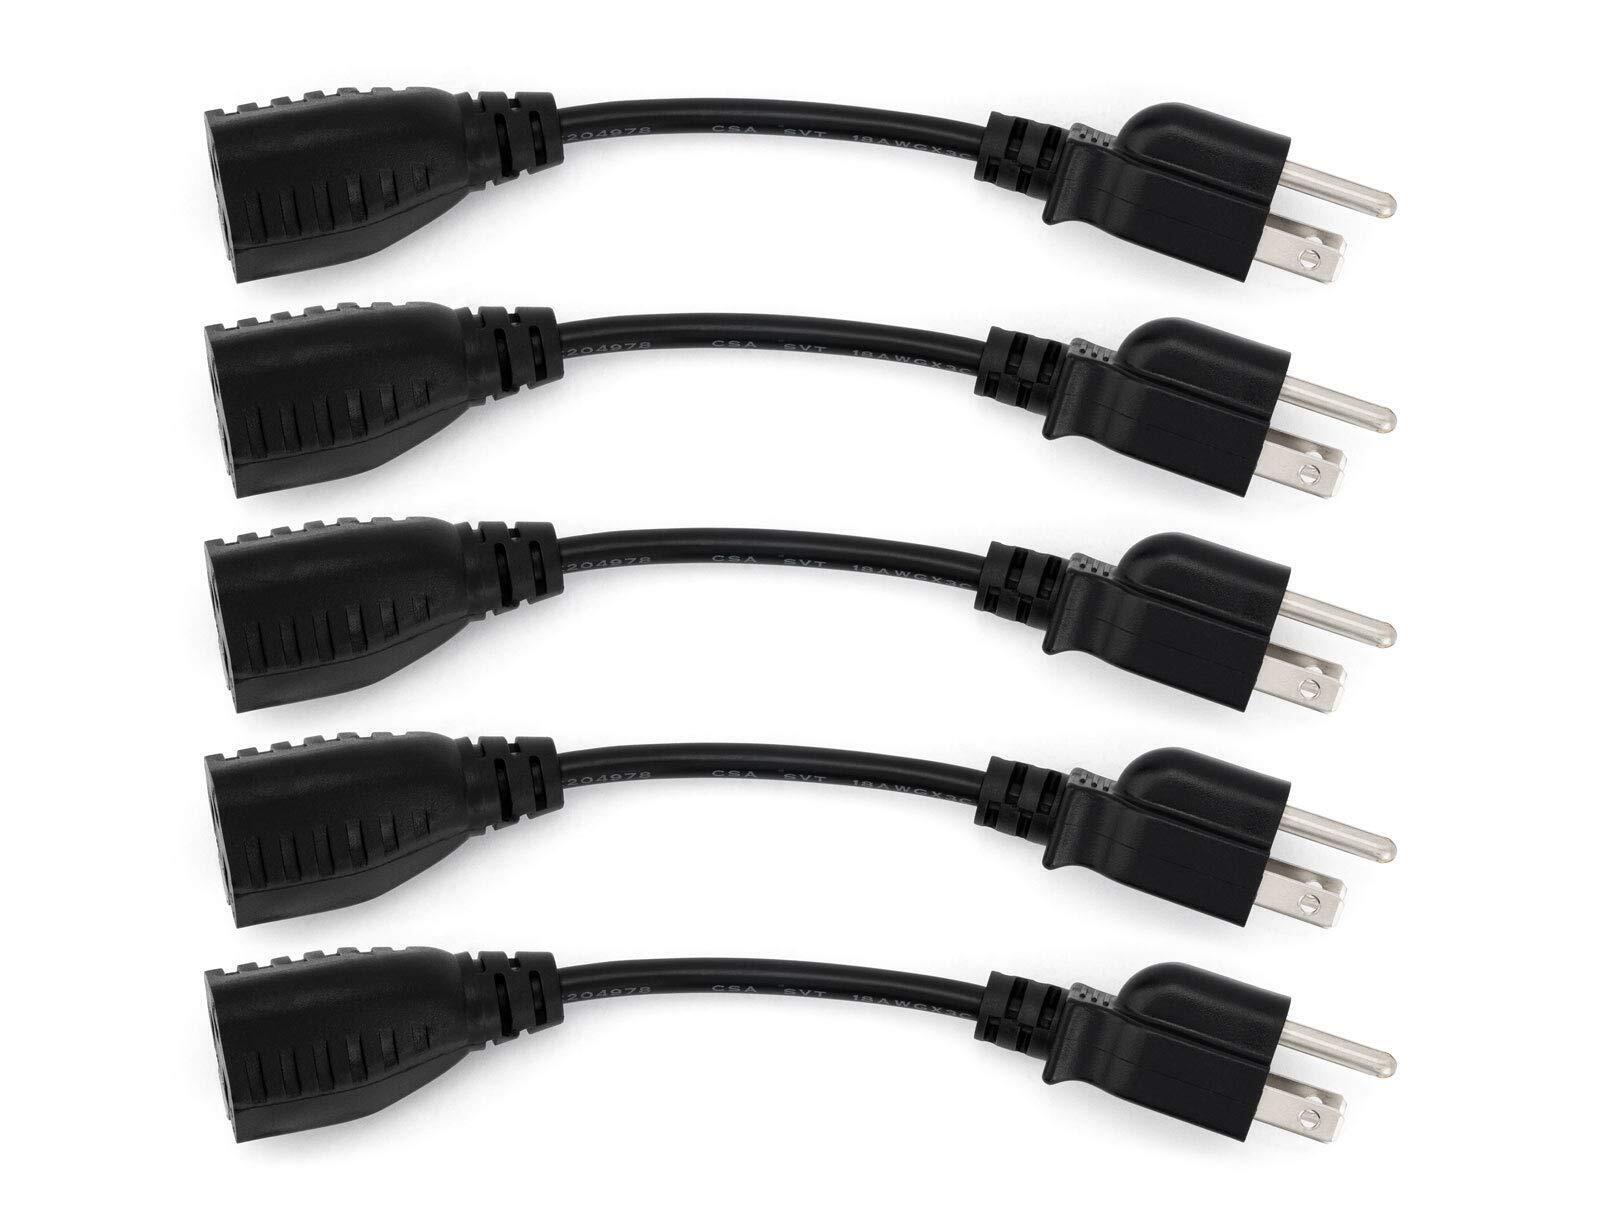 6-Inch Power Extension Cable, 5-Pack, Outlet Saver, 18 AWG